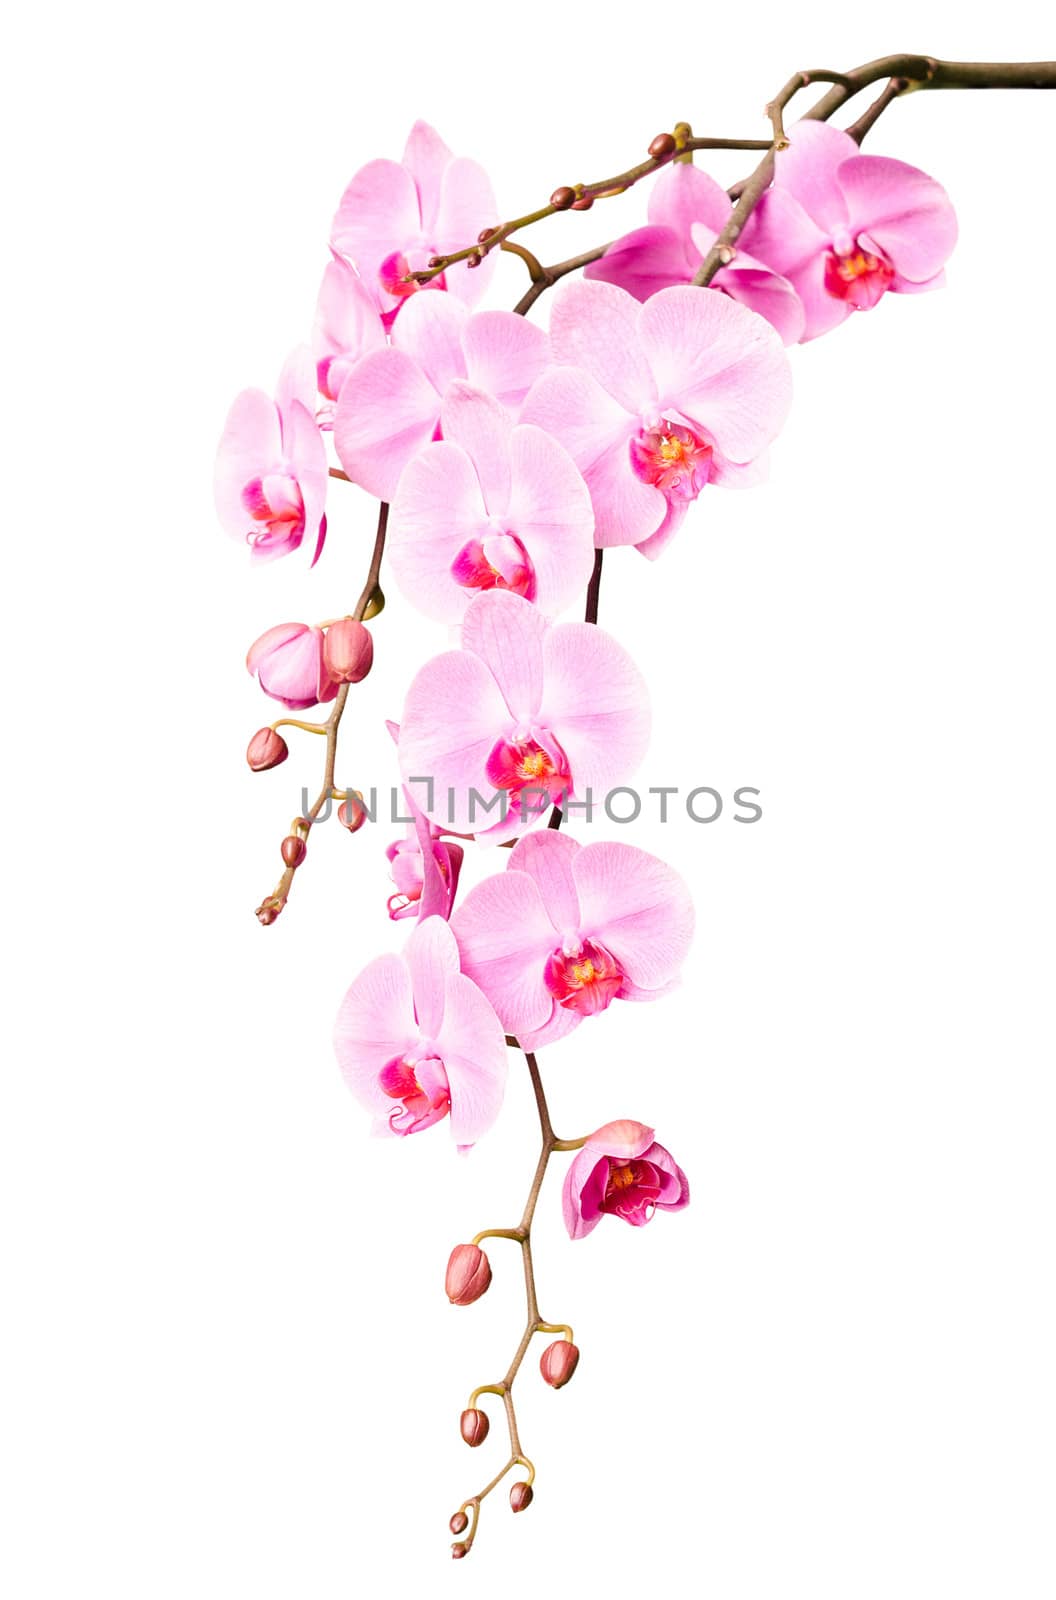 Big beautiful branch of pink orchid flowers with buds by servickuz